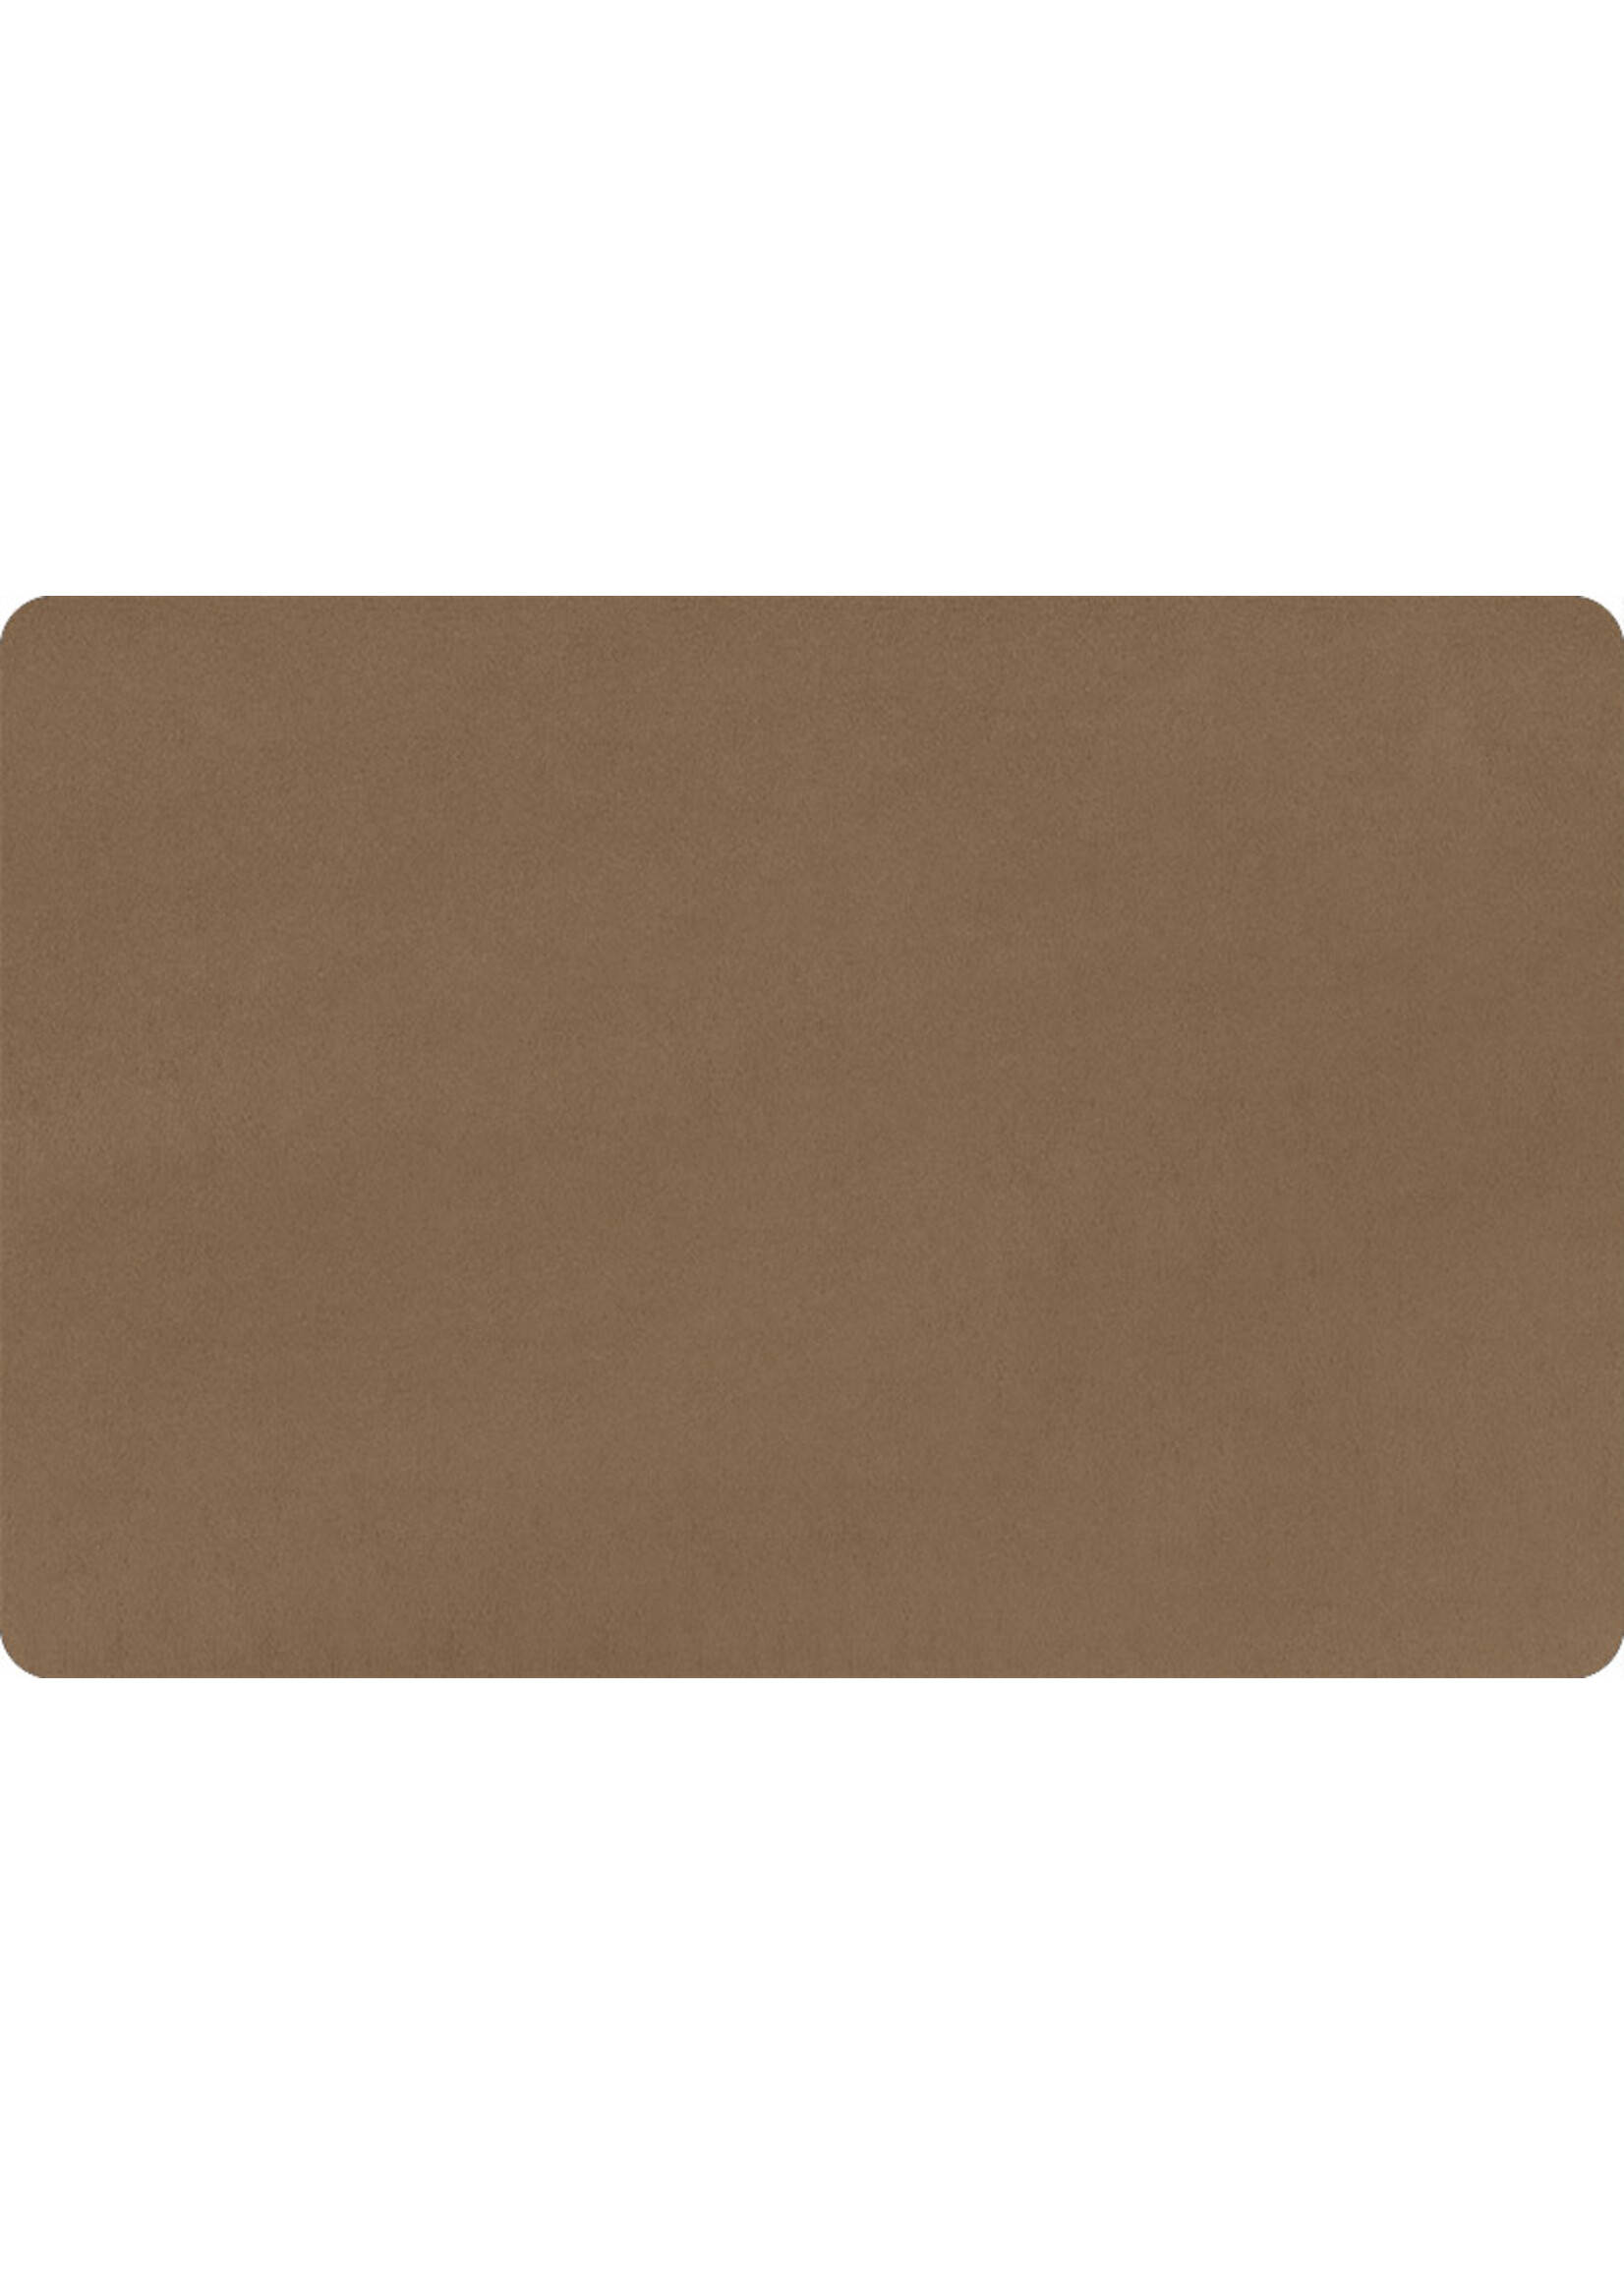 Shannon Fabrics Minky, Extra Wide Solid Cuddle3, 90" Cocoa, (by the inch)